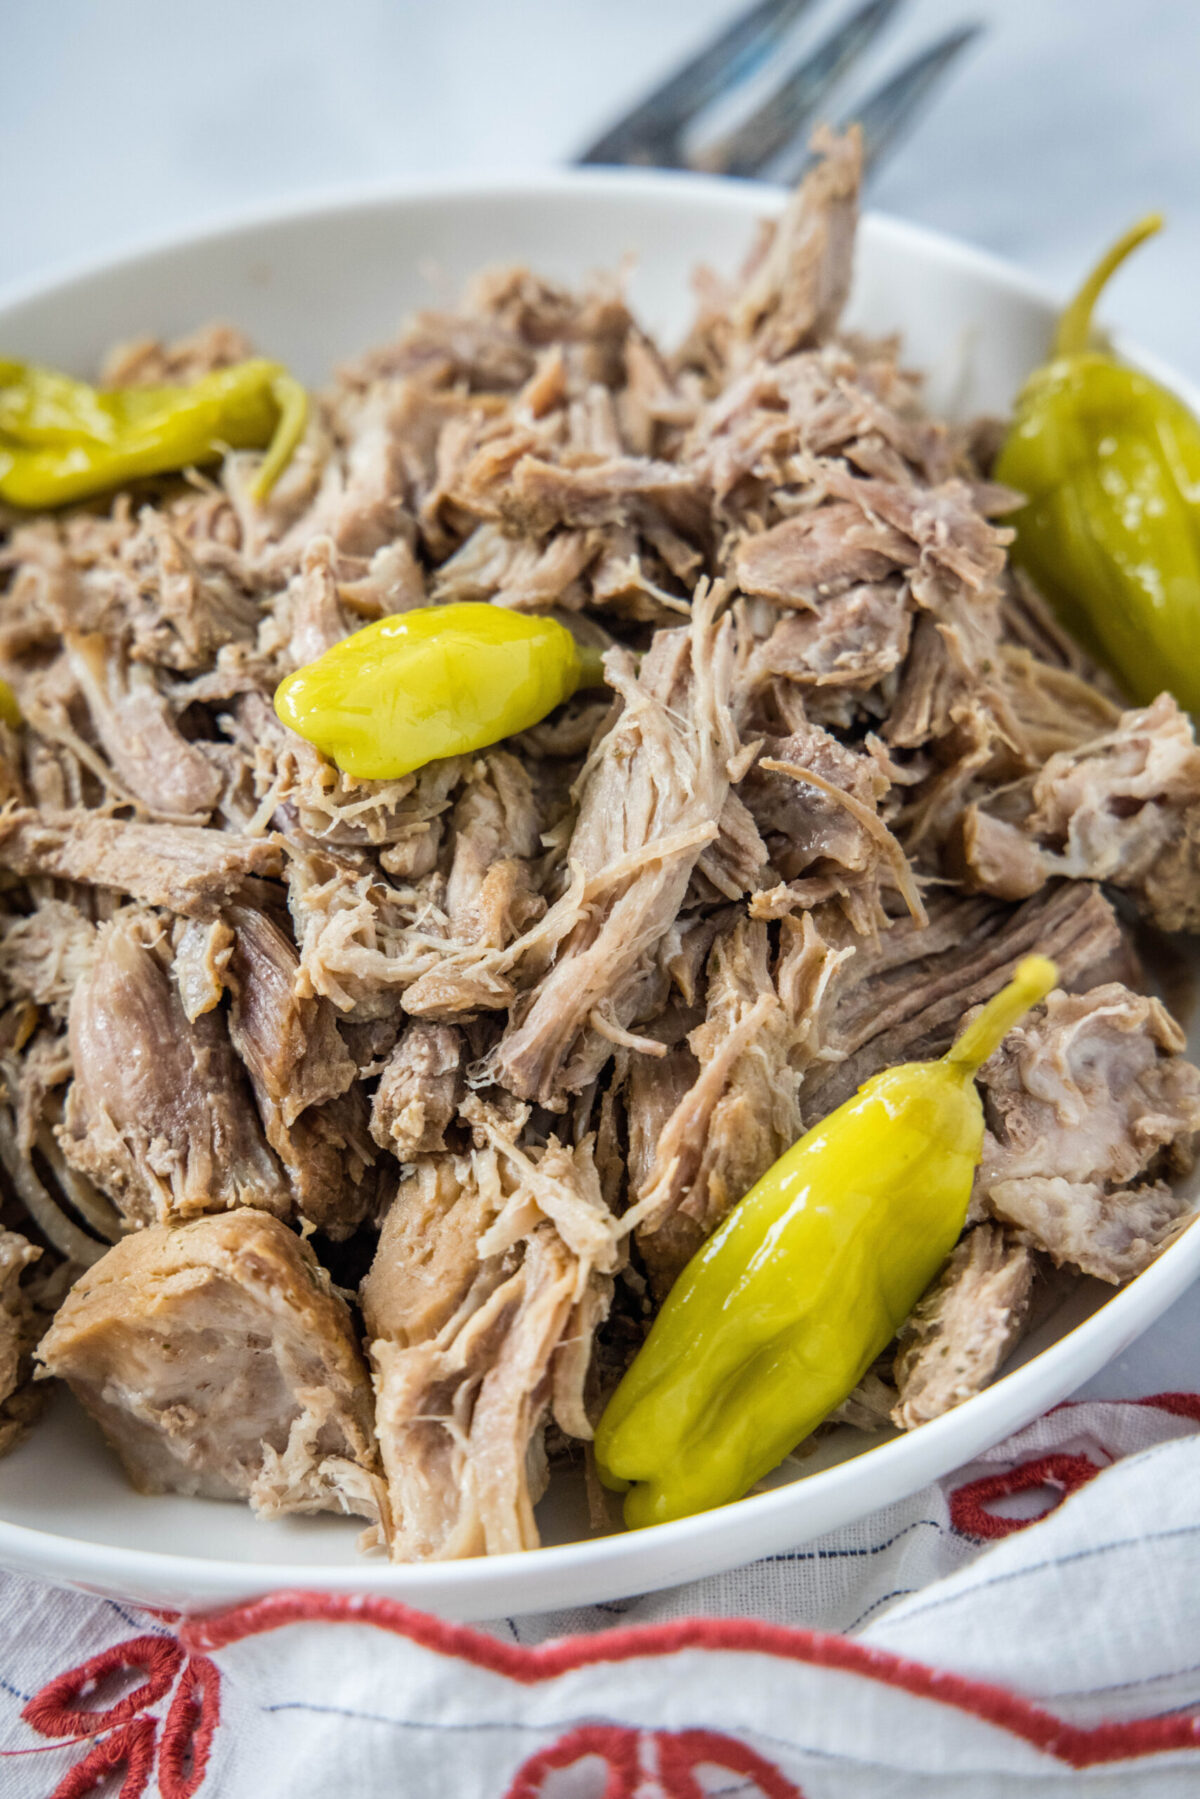 A bowl of shredded pork with pepperoncini peppers, next to a fork